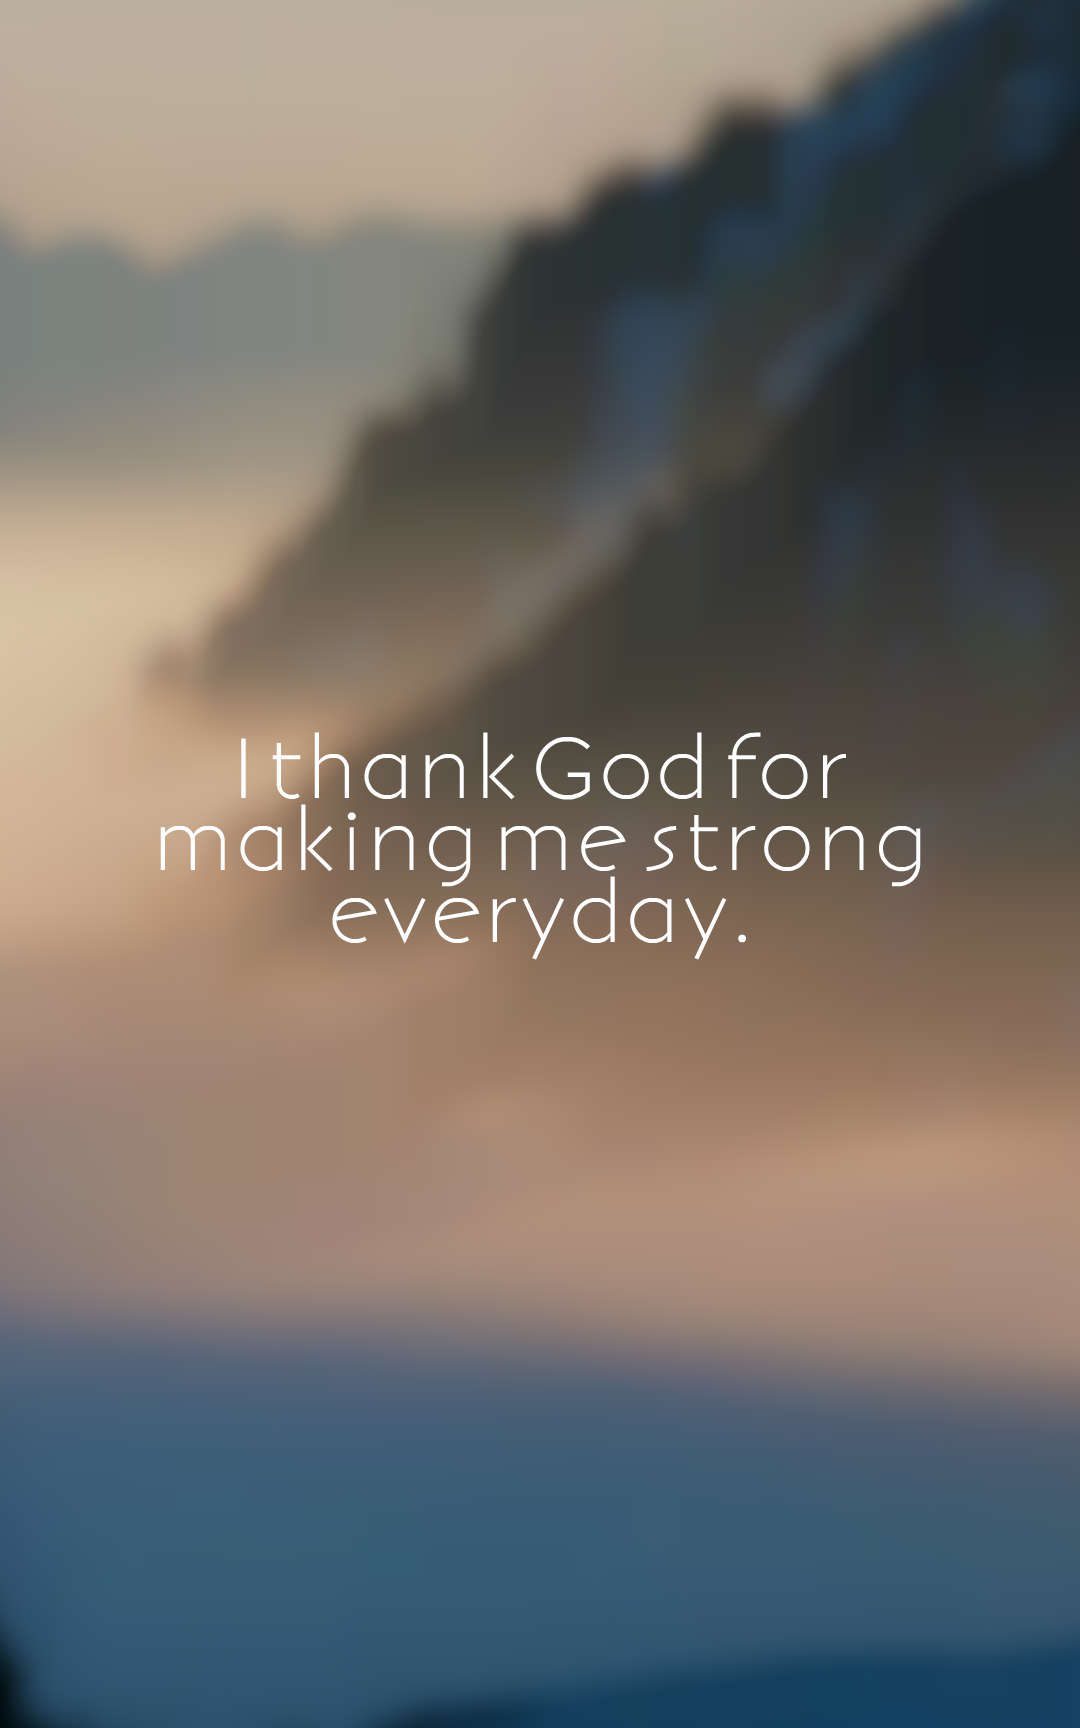 I thank God for making me strong everyday.